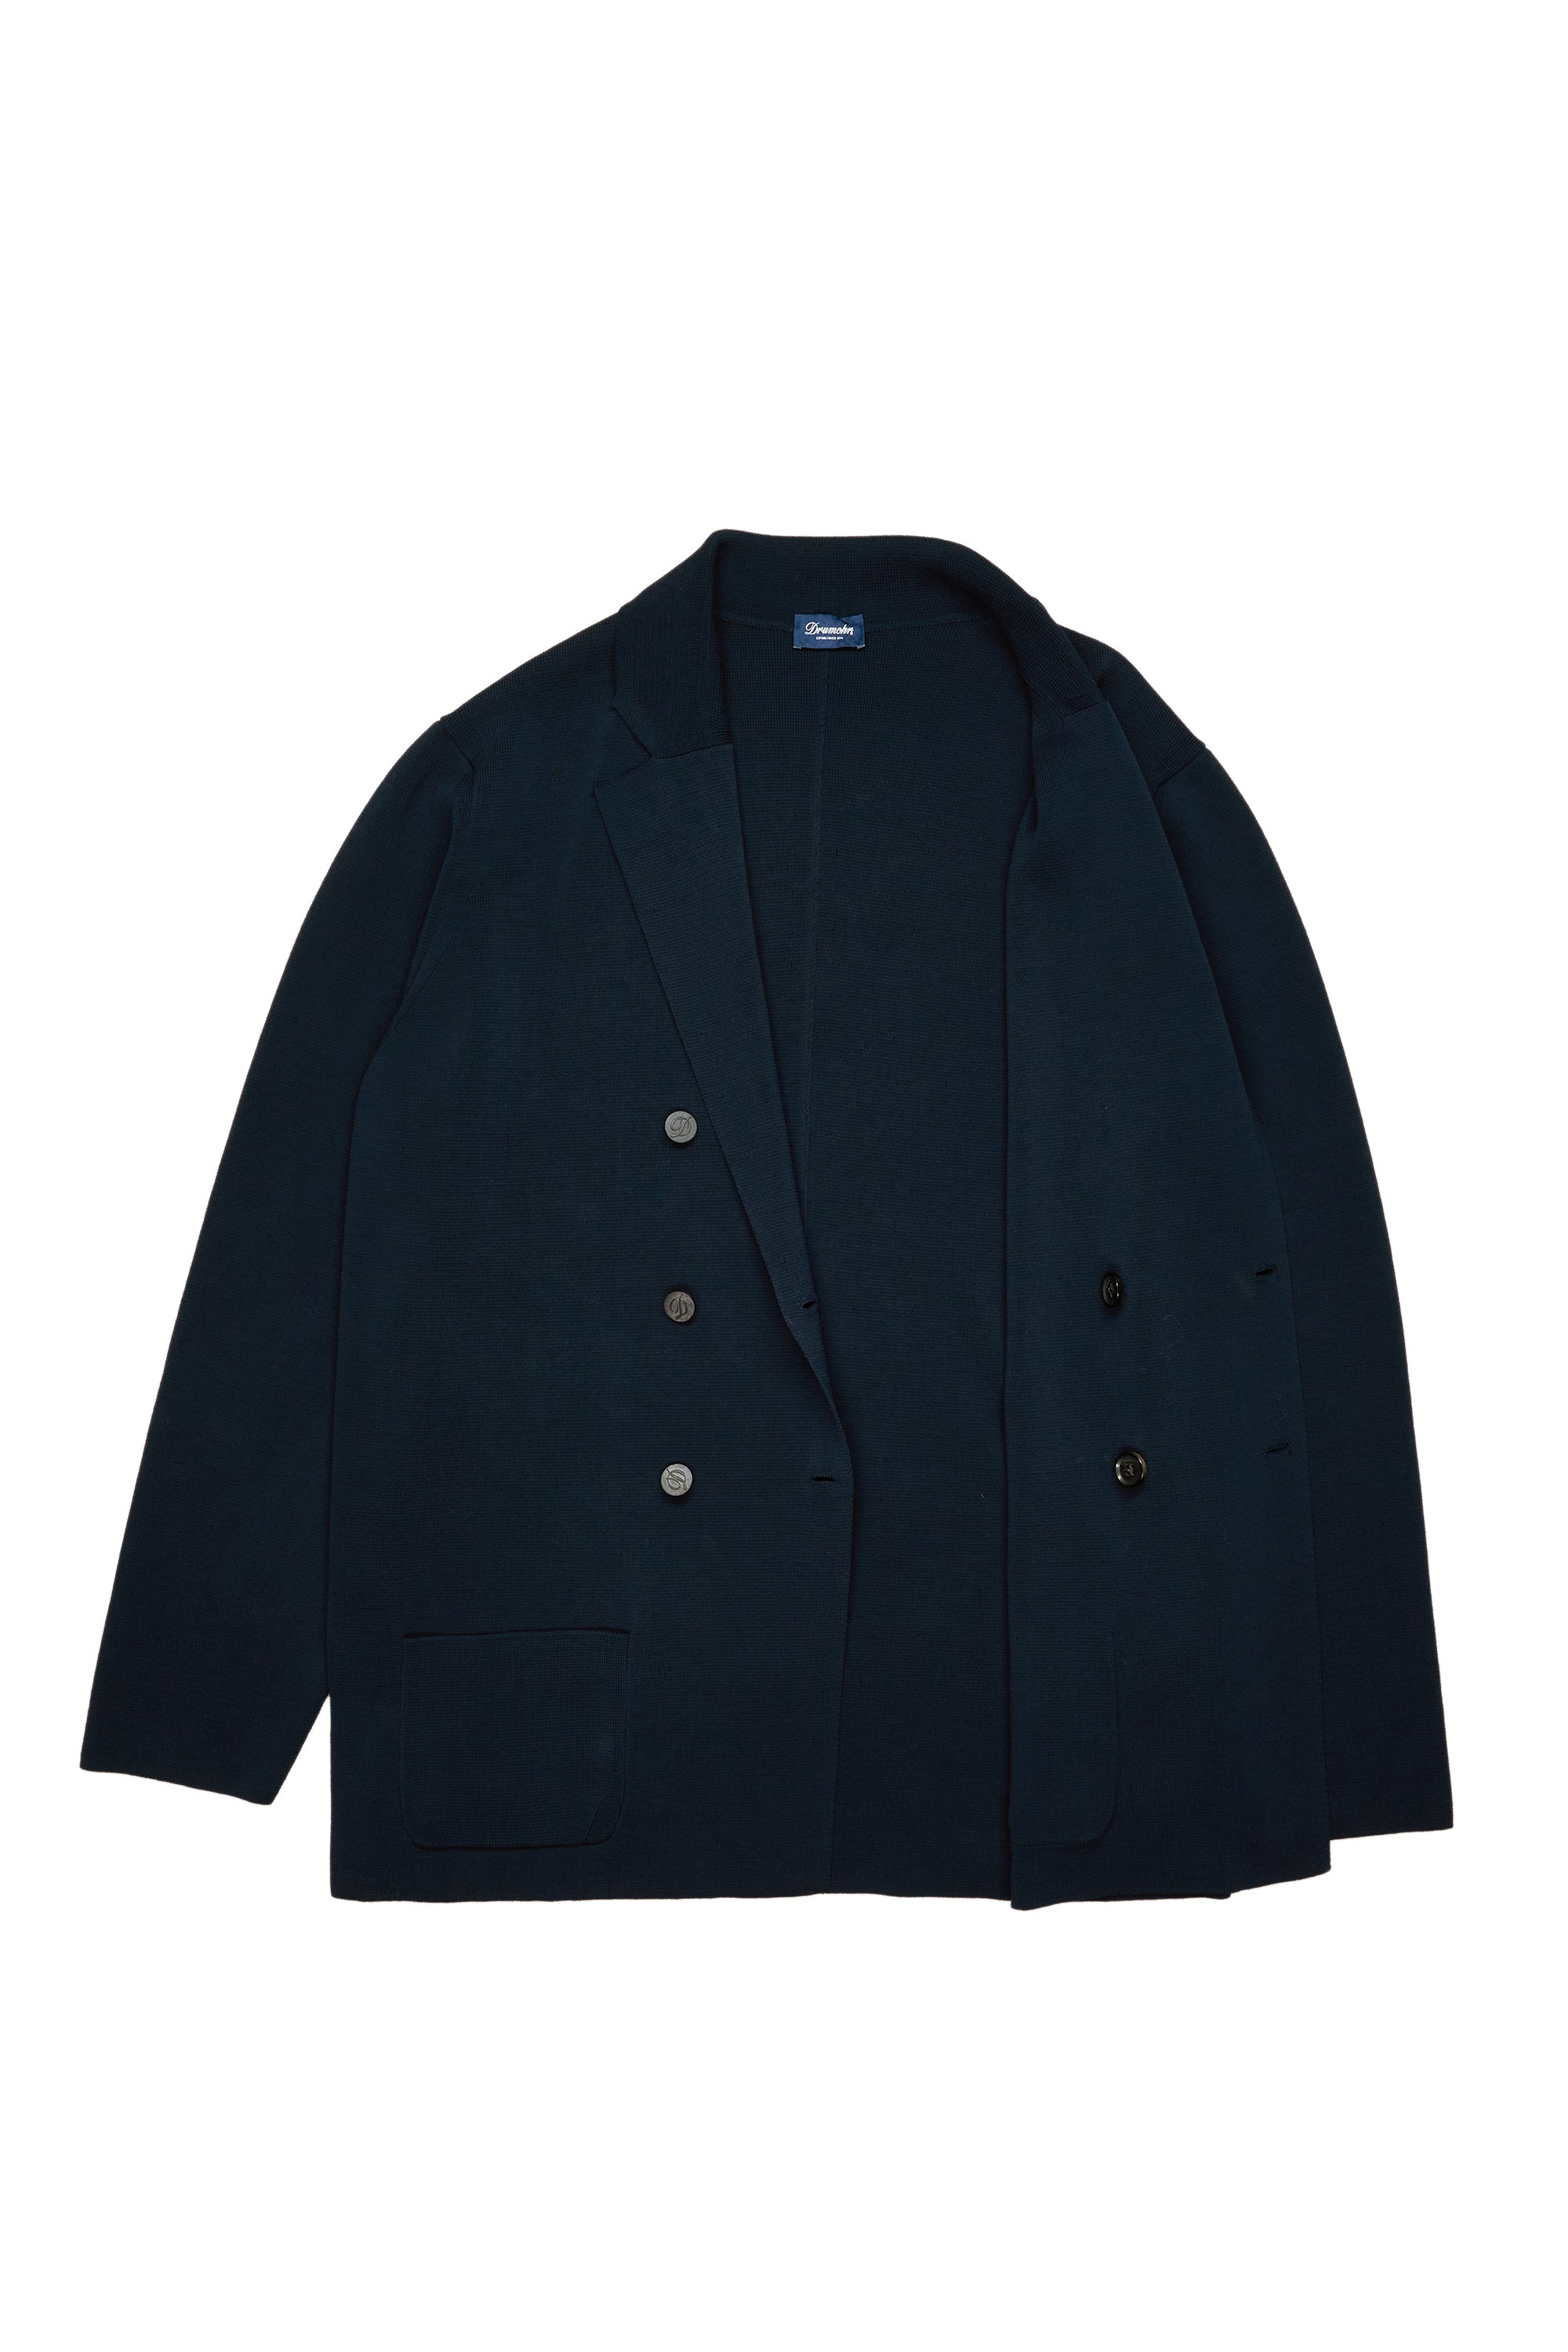 Drumohr Navy Cotton Knitted Double Breasted Jacket